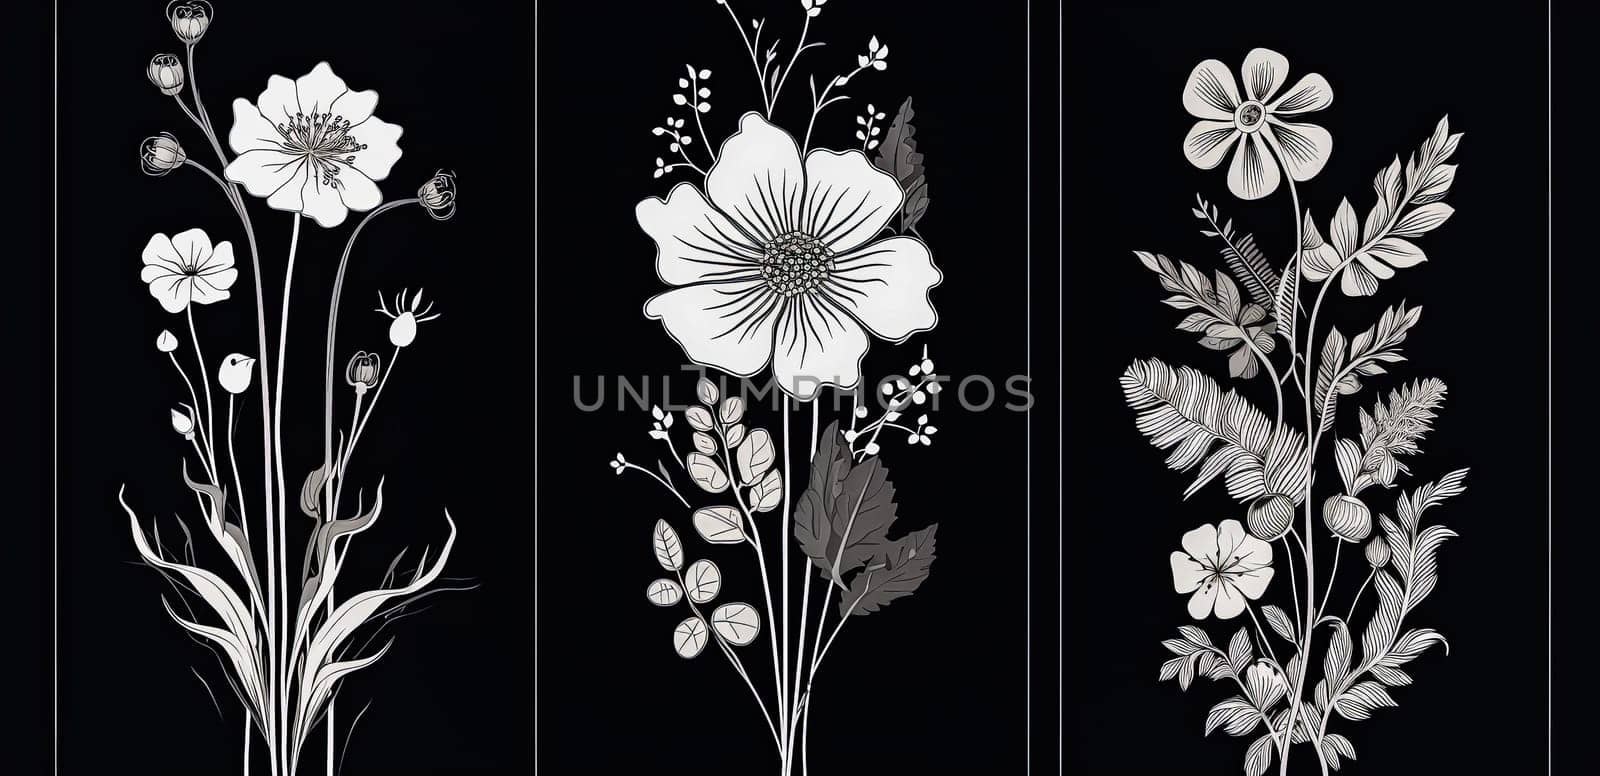 Hand drawn black silhouettes of grass, flowers, herbs, and various insects isolated on a white background. Sketch style illustration perfect for various design projects.